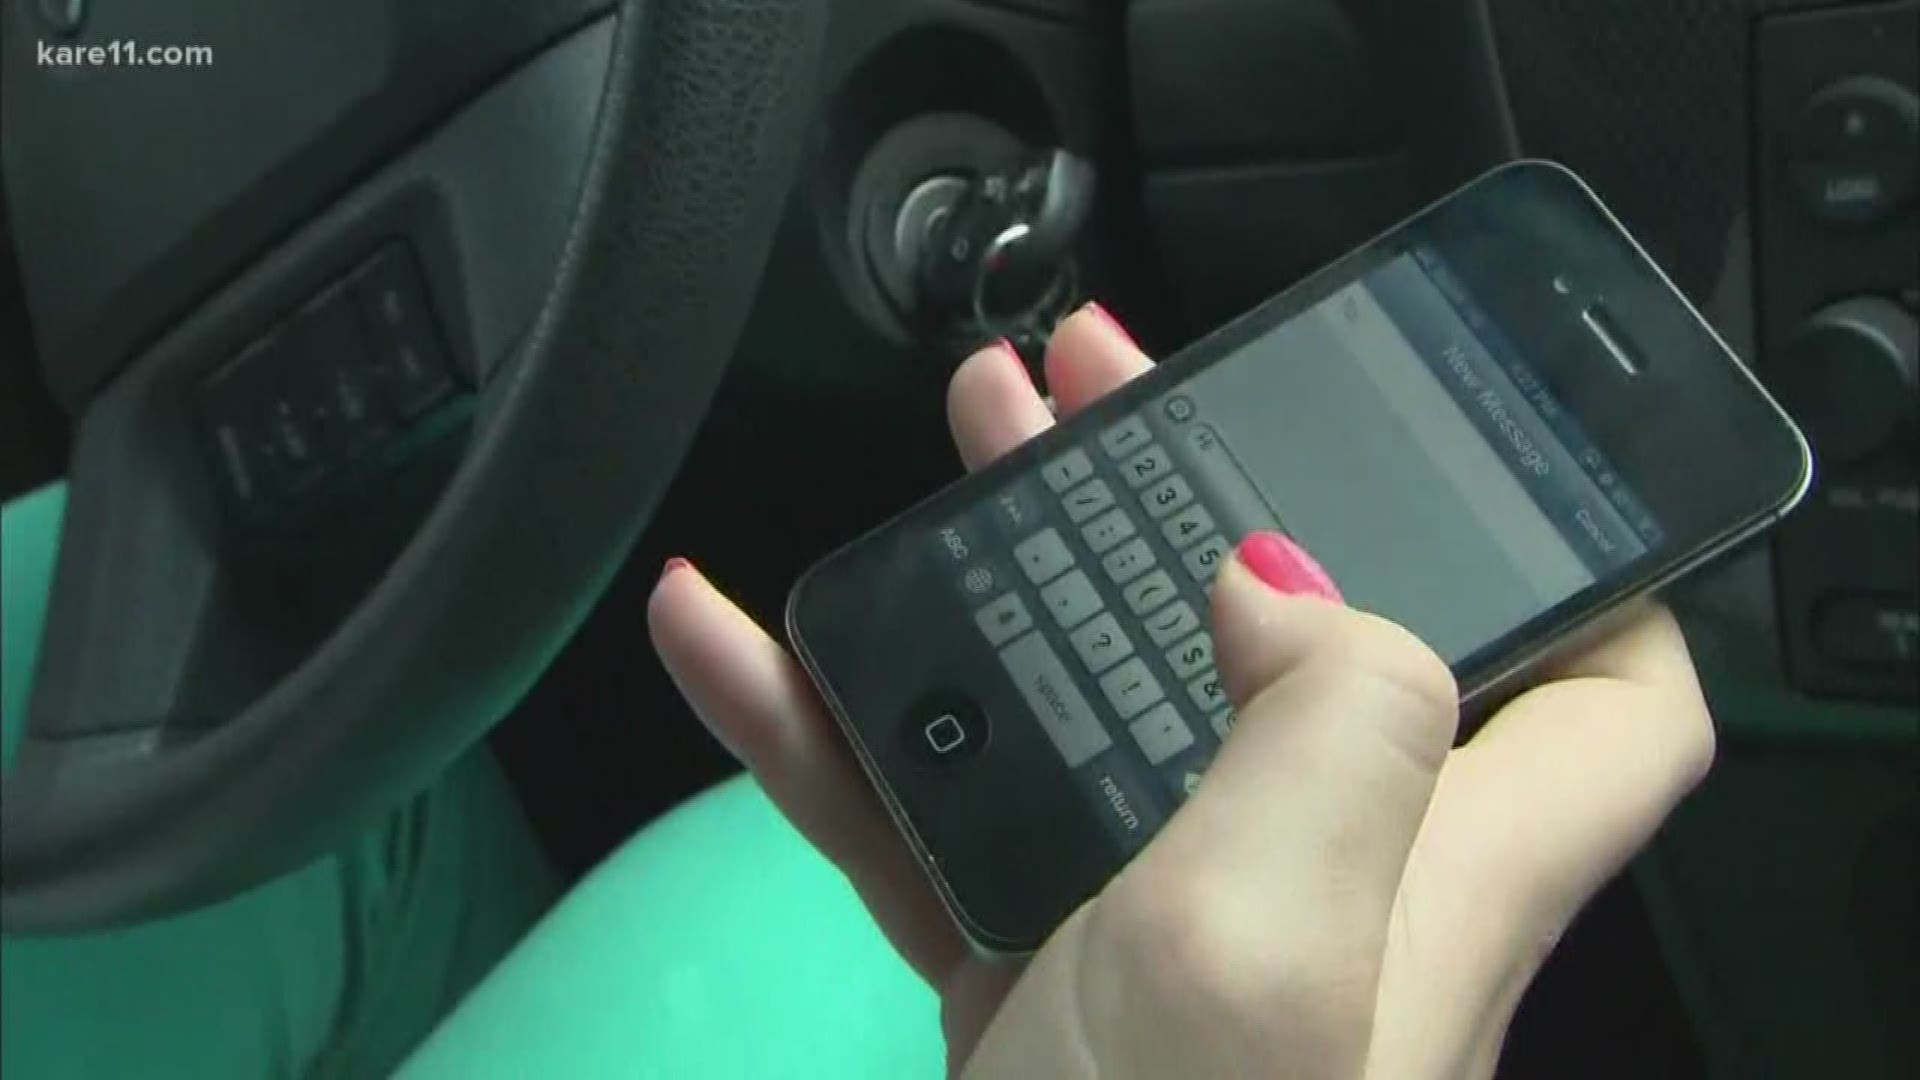 A bill that would ban holding a cell phone in your hands while driving was revived. And, this time it has a greater chance of becoming law.